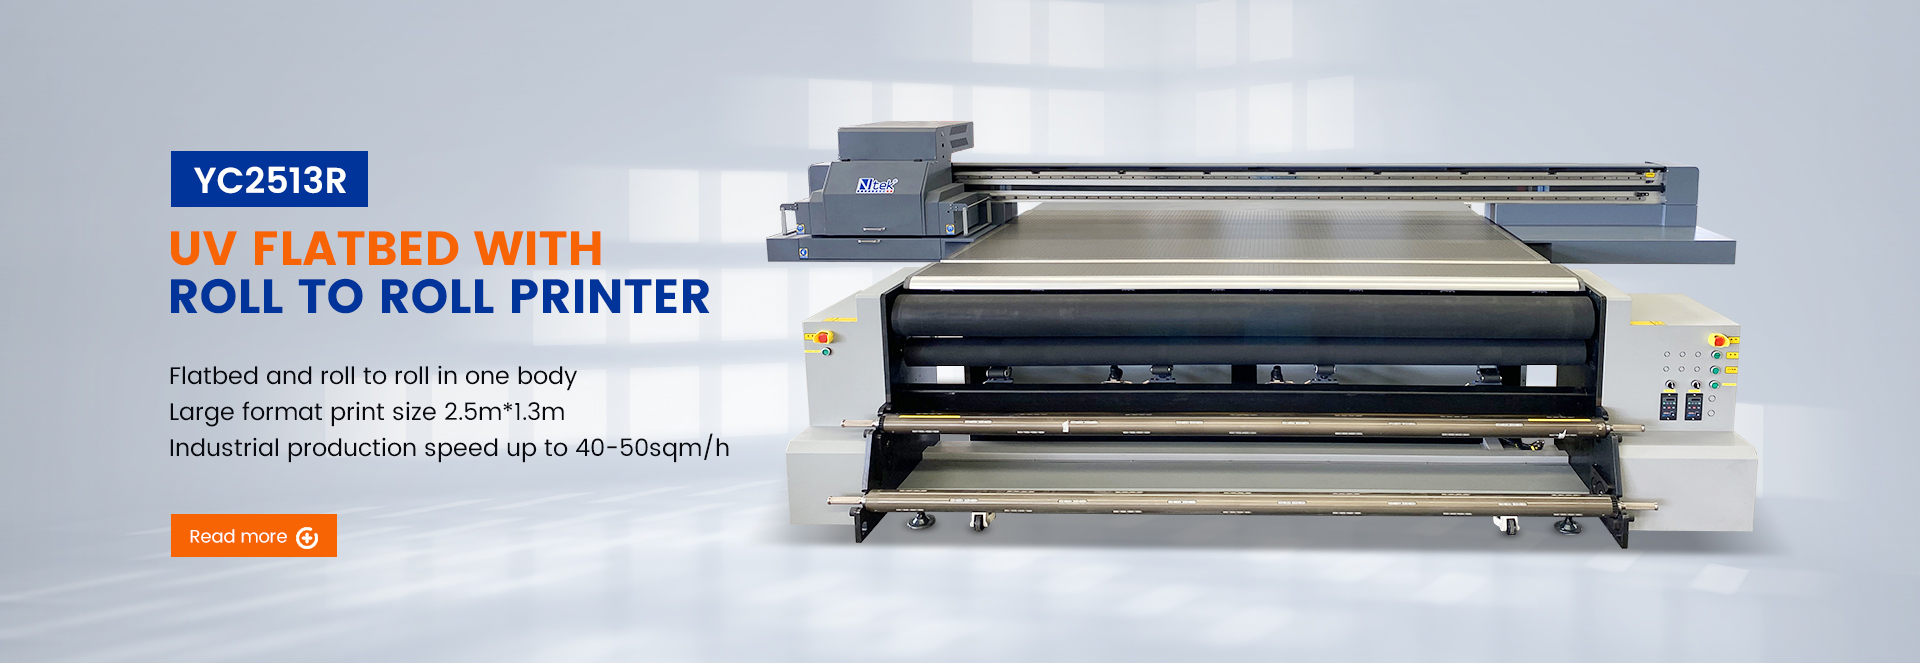 UV Flatbed with Roll To Roll Printer